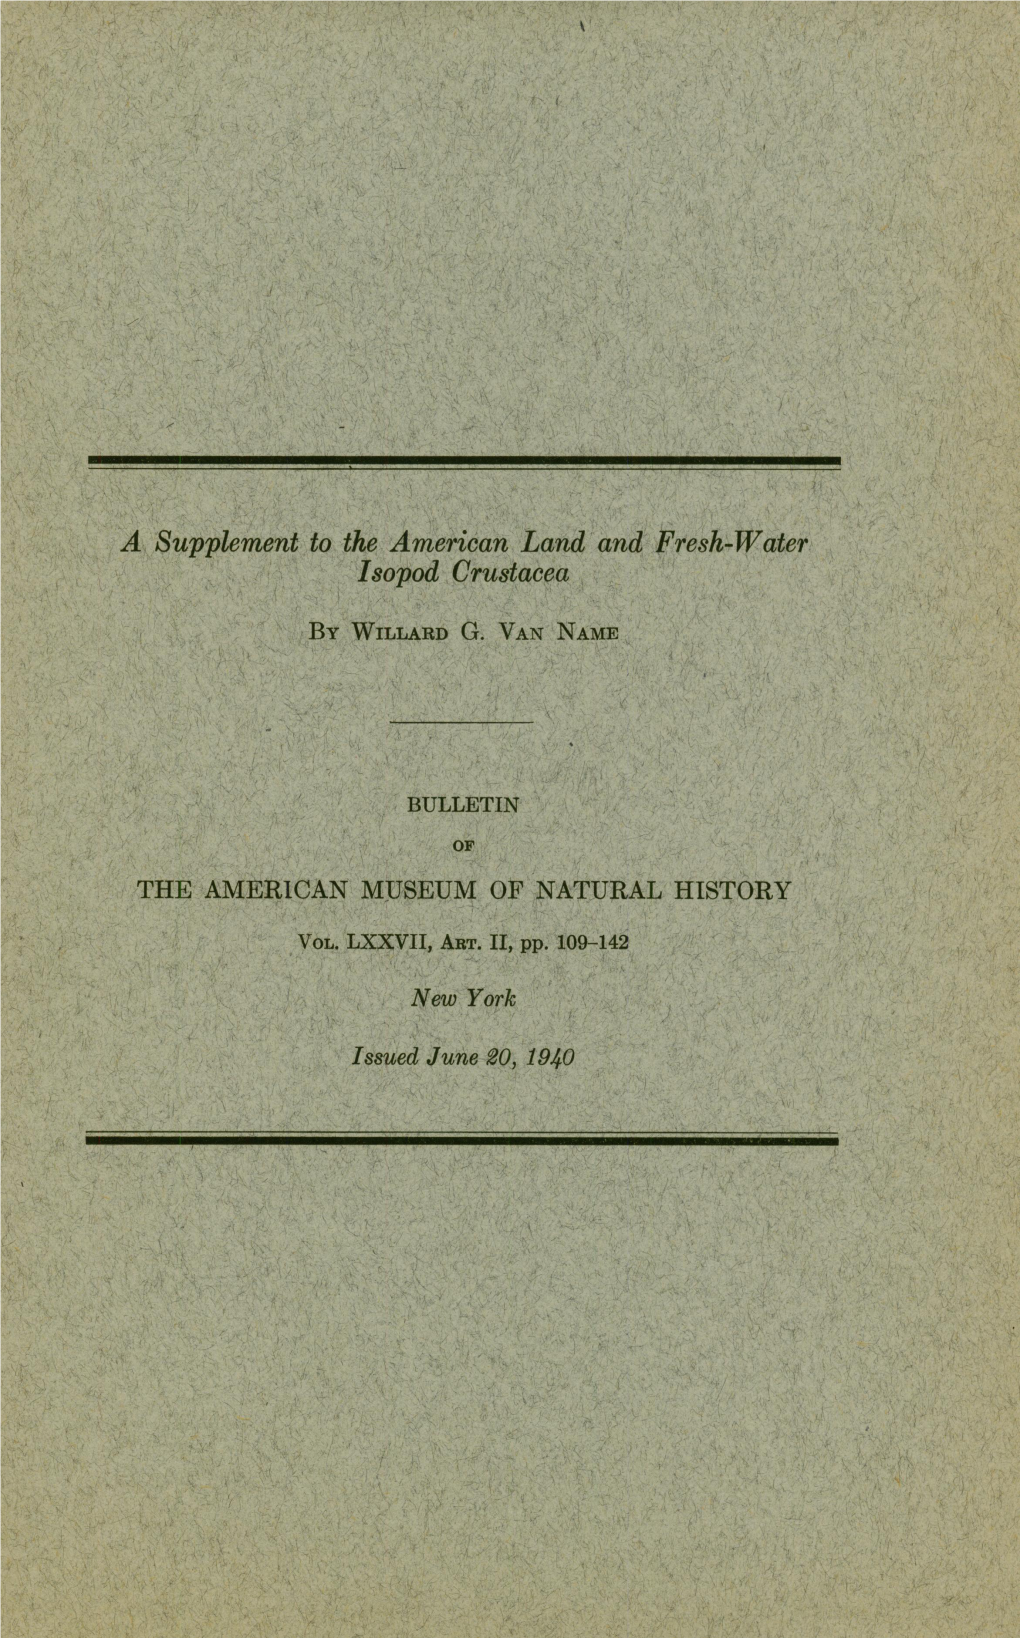 A, Supplement to the American Land and Lresh-Water Isopod Crustacea